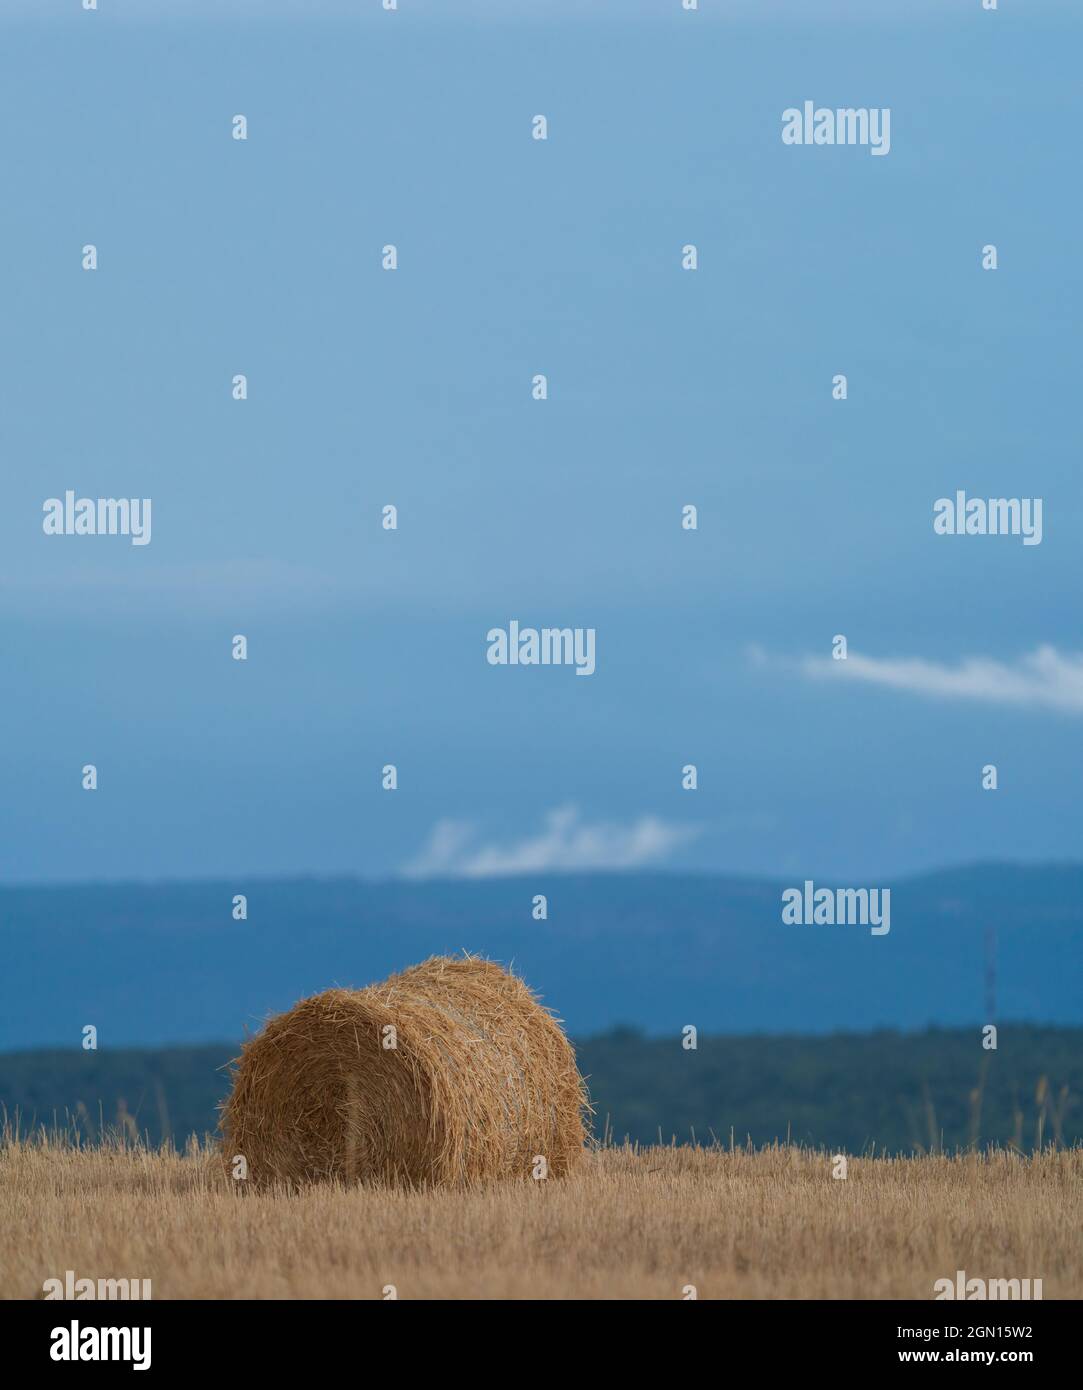 Ball of straw under the clear sky Stock Photo